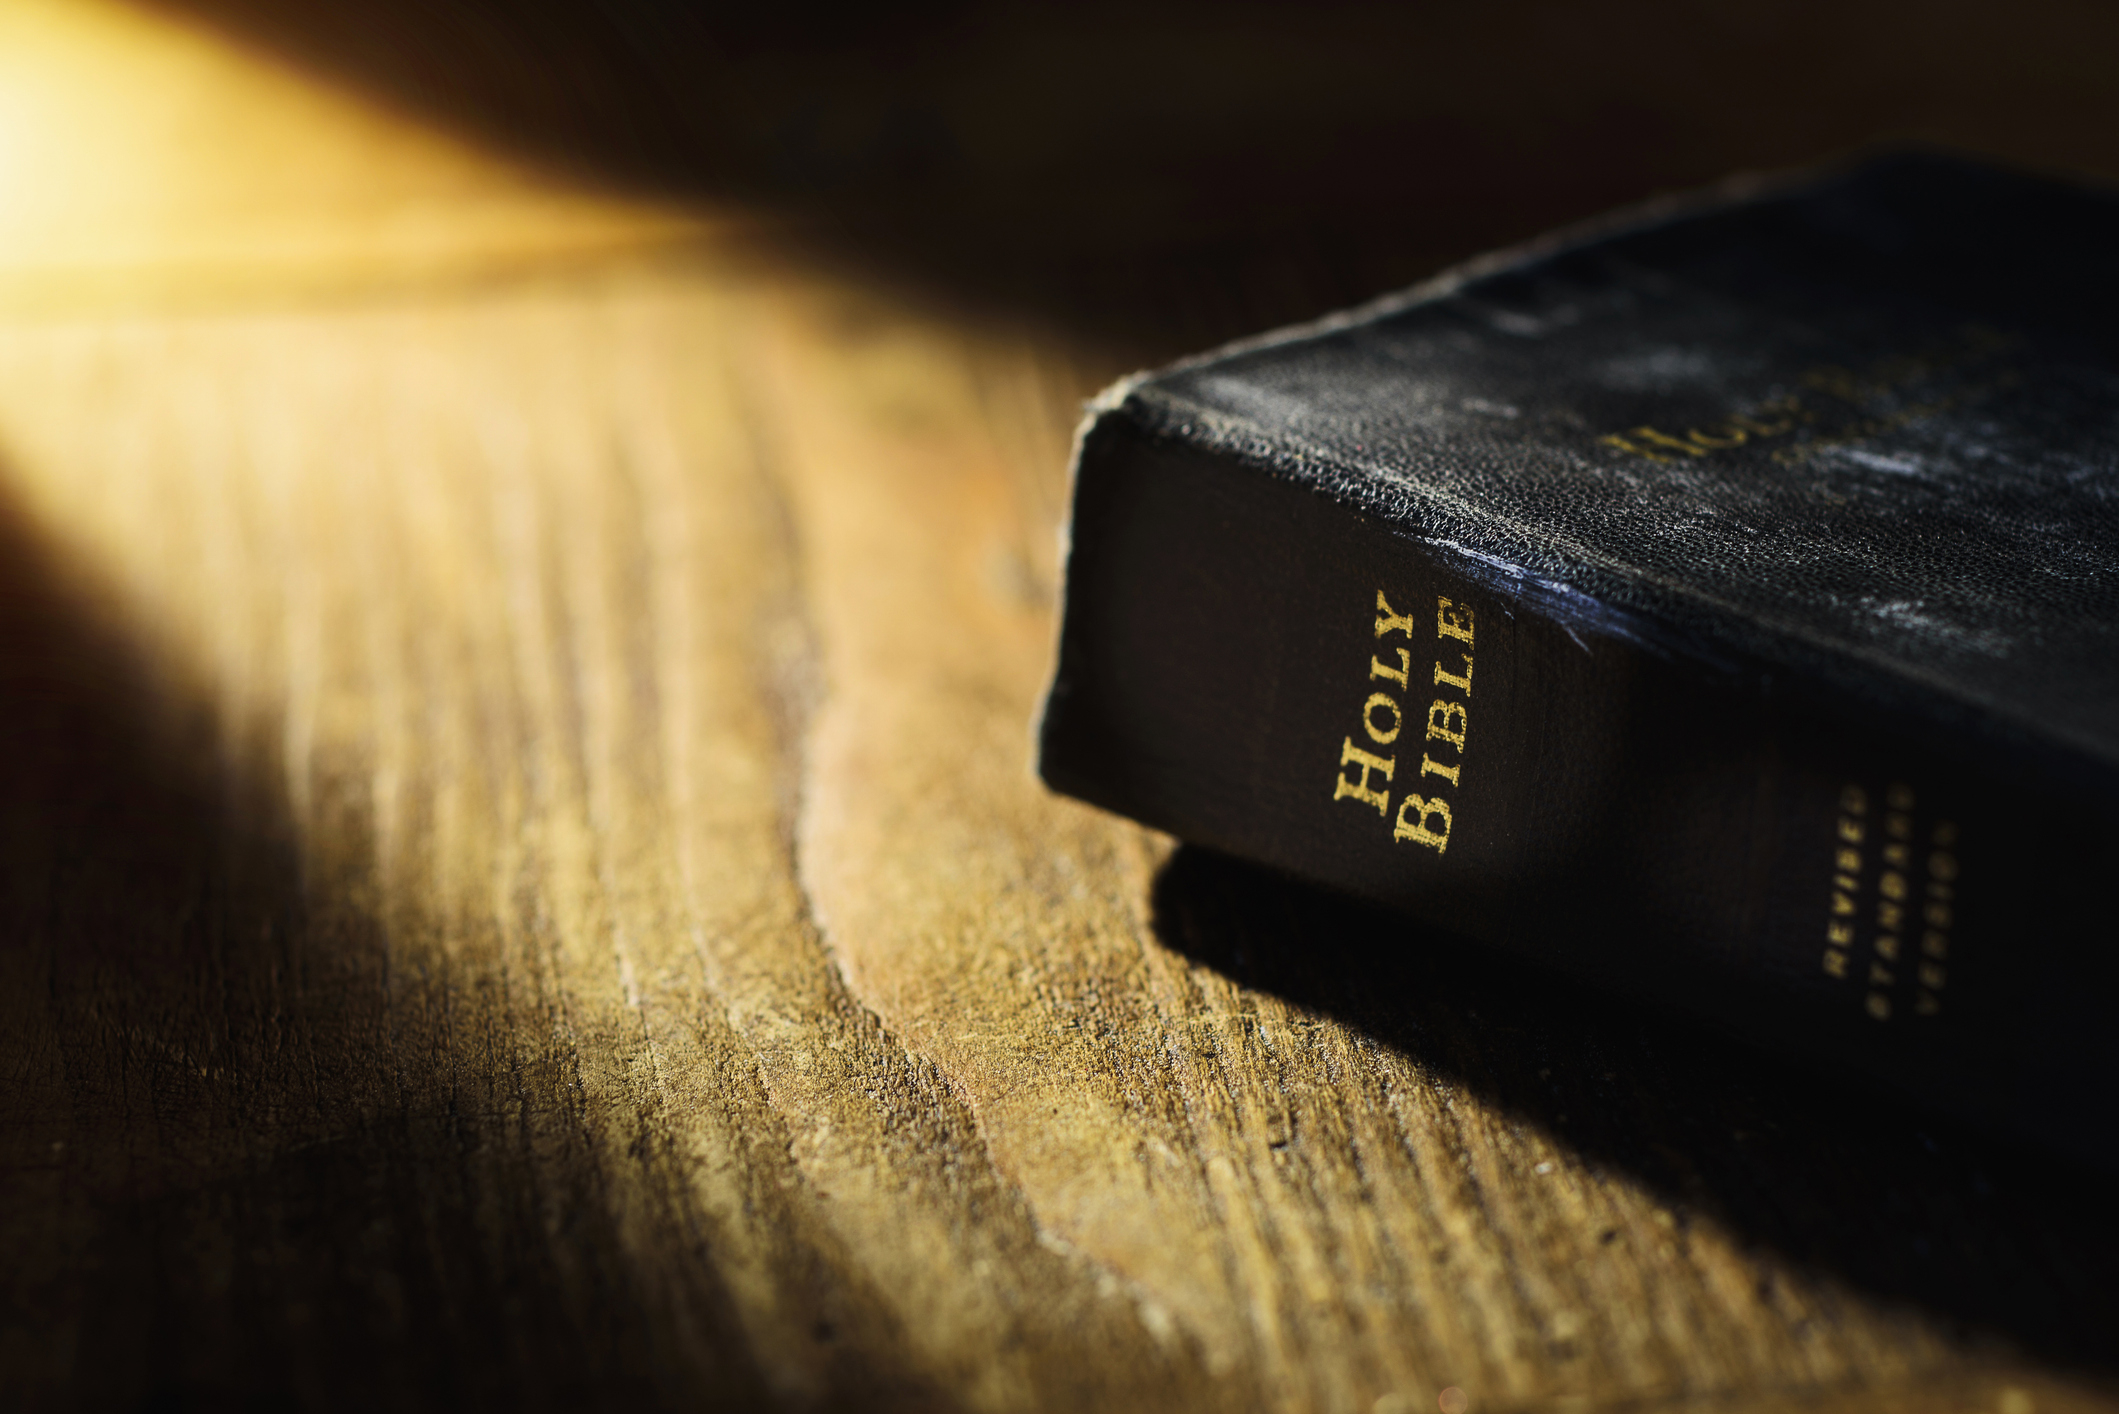 A close-up of a Holy Bible on a wooden surface with sunlight highlighting the title